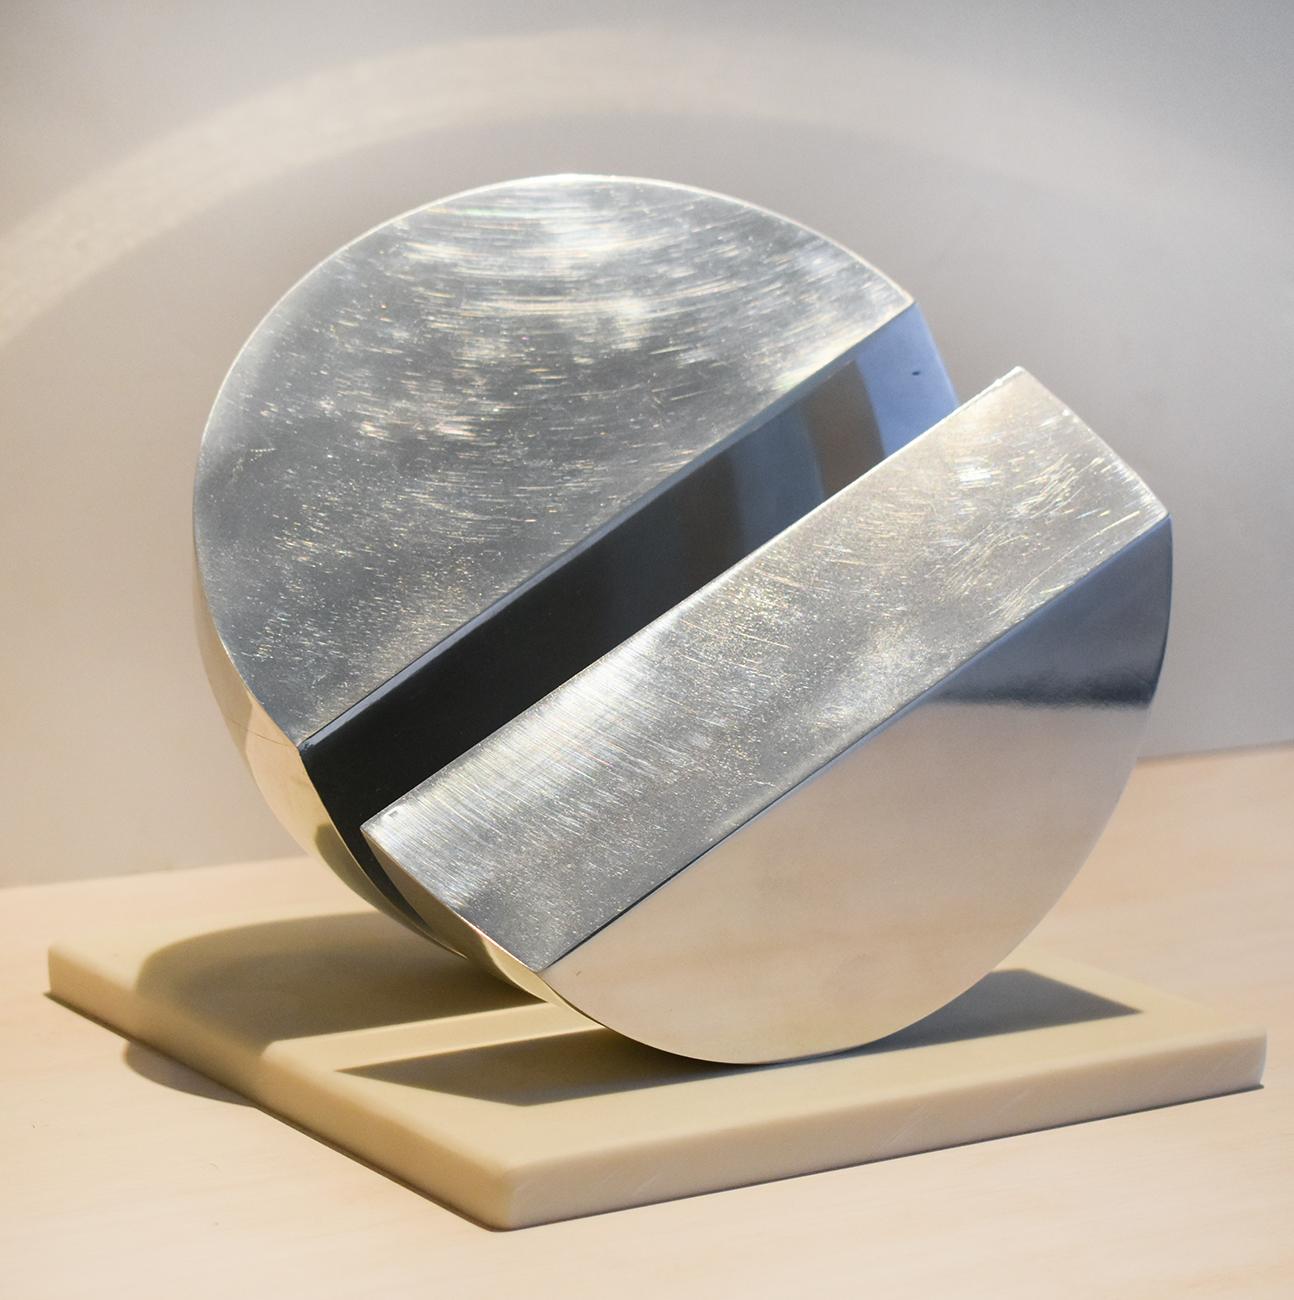 Small abstract, minimalist mid century modern style sculpture 
Silver colored polished stainless steel and marble base
7 x 6 x 6 inches
Marble base measures 7 x 7 inches
Sculpture weighs about 15 lbs. 

This small, contemporary abstract silver